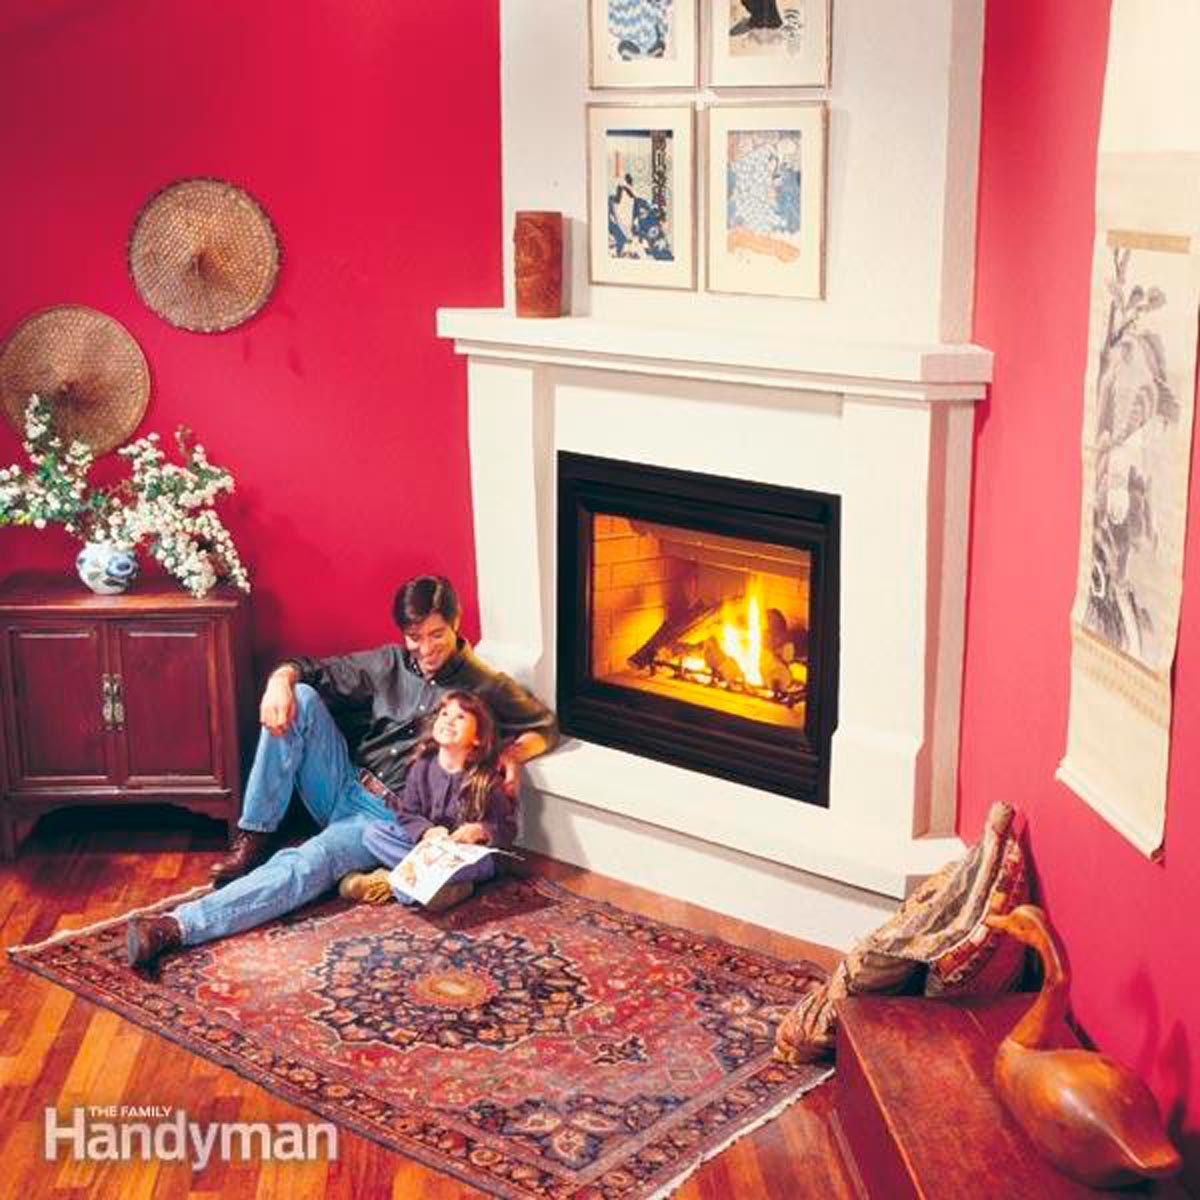 How To Install A Gas Fireplace Diy, How Hard Is It To Add A Fireplace An Existing Home